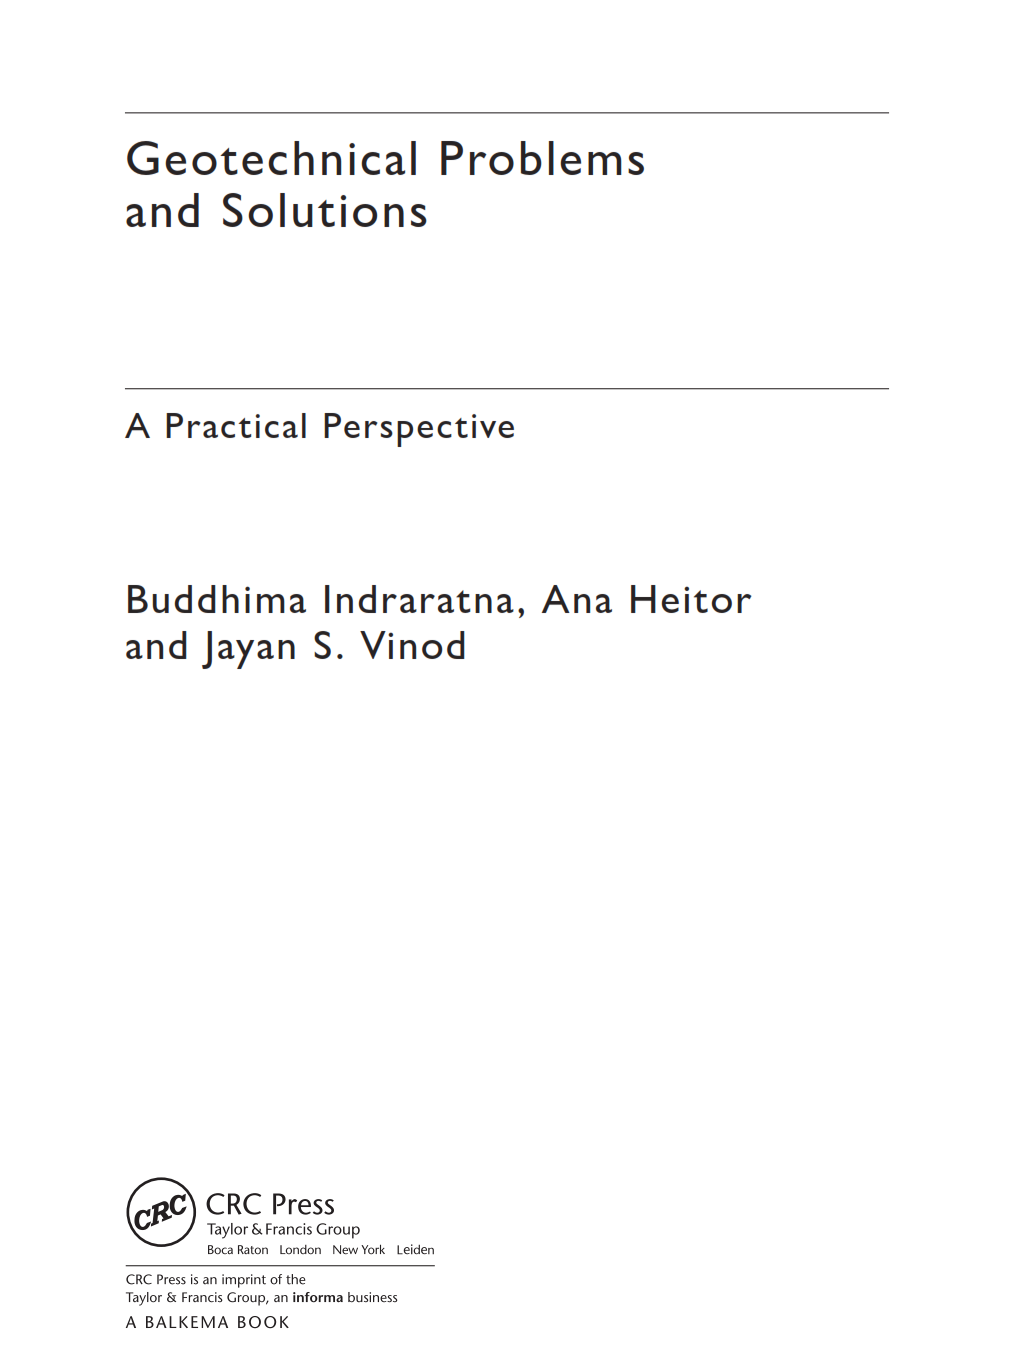 download free Geotechnical Problems and Solutions A Practical Perspective download eBook pdf | Gioumeh.com Buddhima Indraratna, Ana Heitor, Jayan S. Vinod